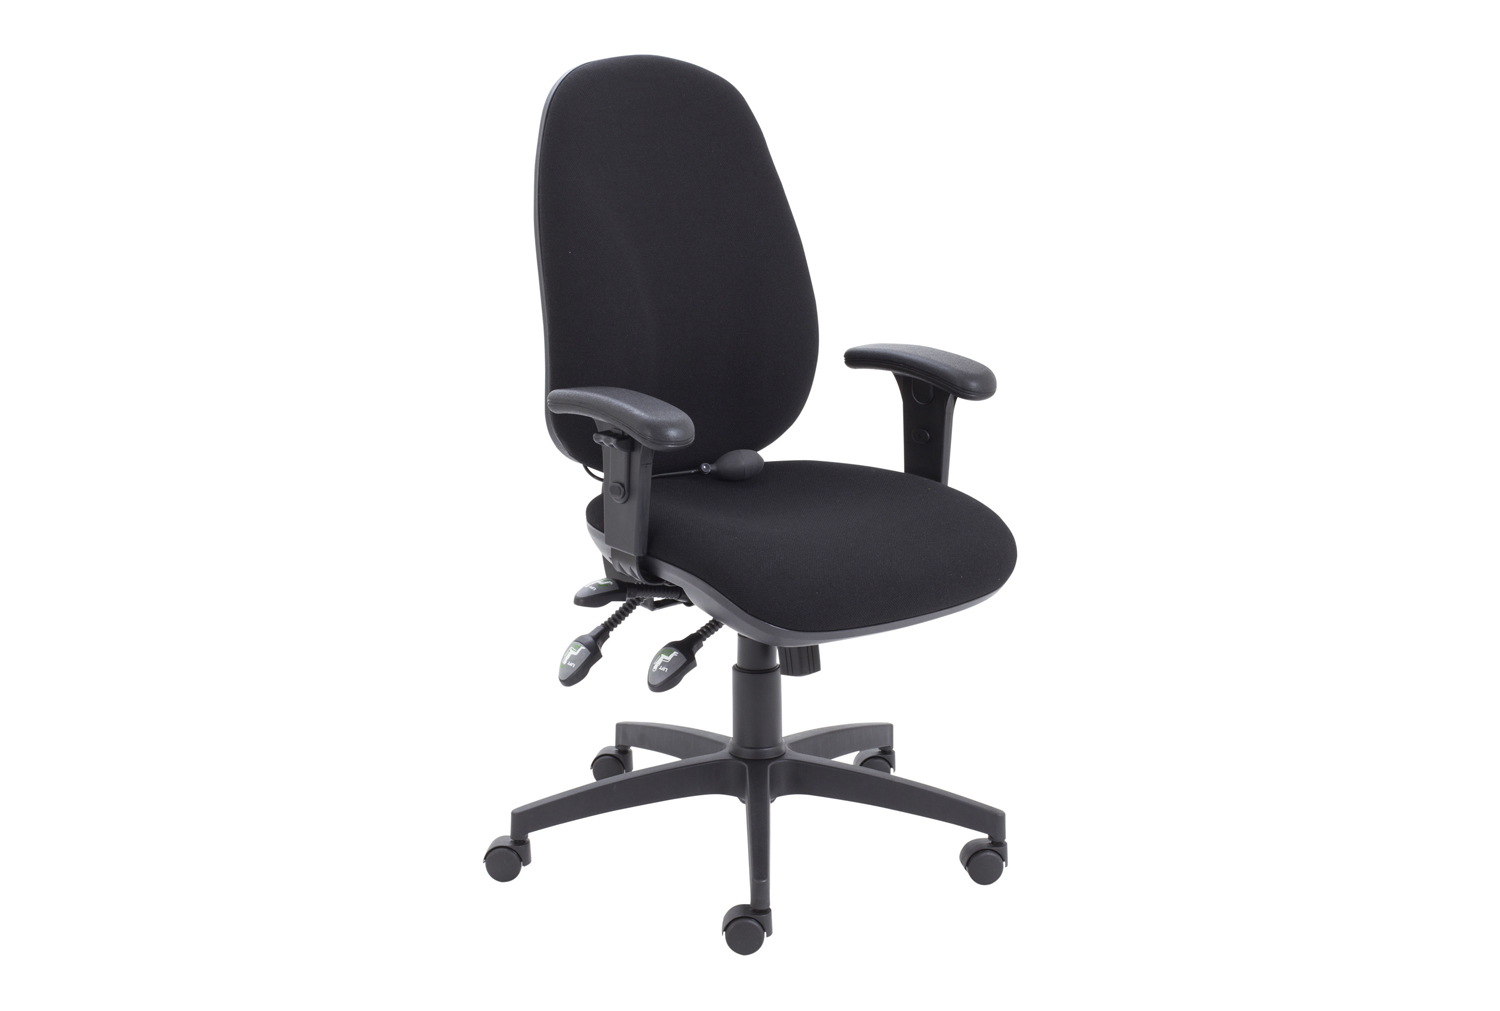 Orchid Deluxe Lumbar Pump Ergonomic Operator Office Chair With Height Adjustable Arms, Black, Express Delivery